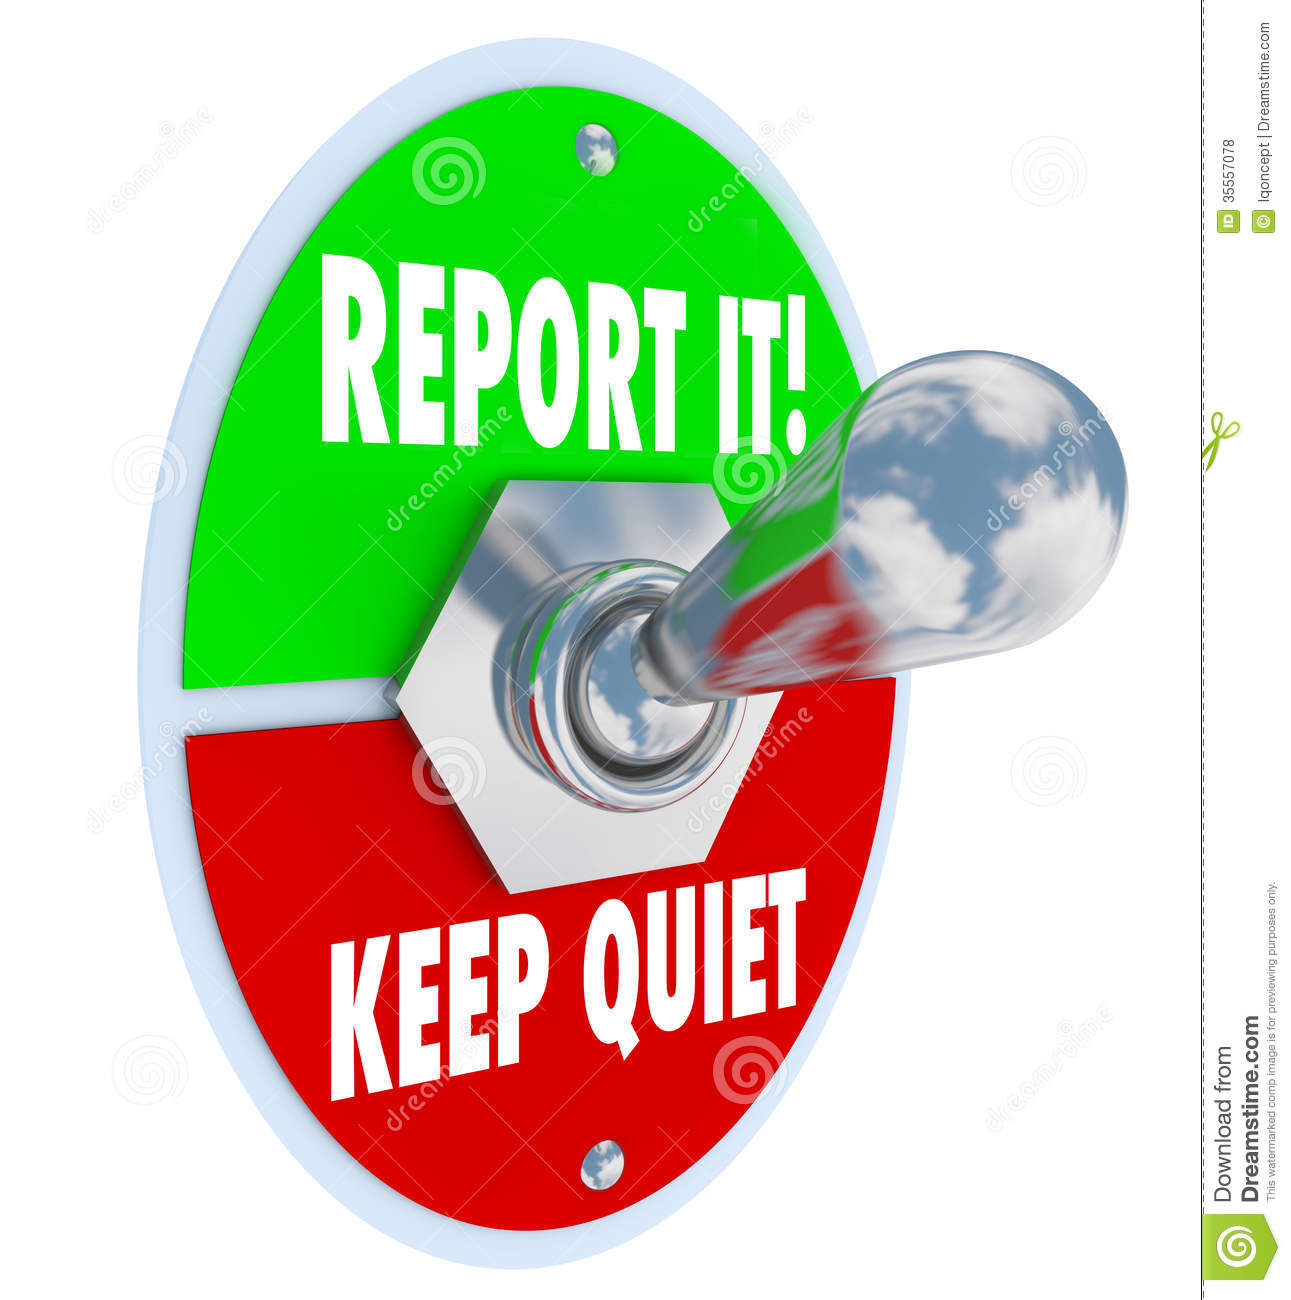 Report It Vs Keep Quiet Toggle Switch Right Choice Royalty Free Stock